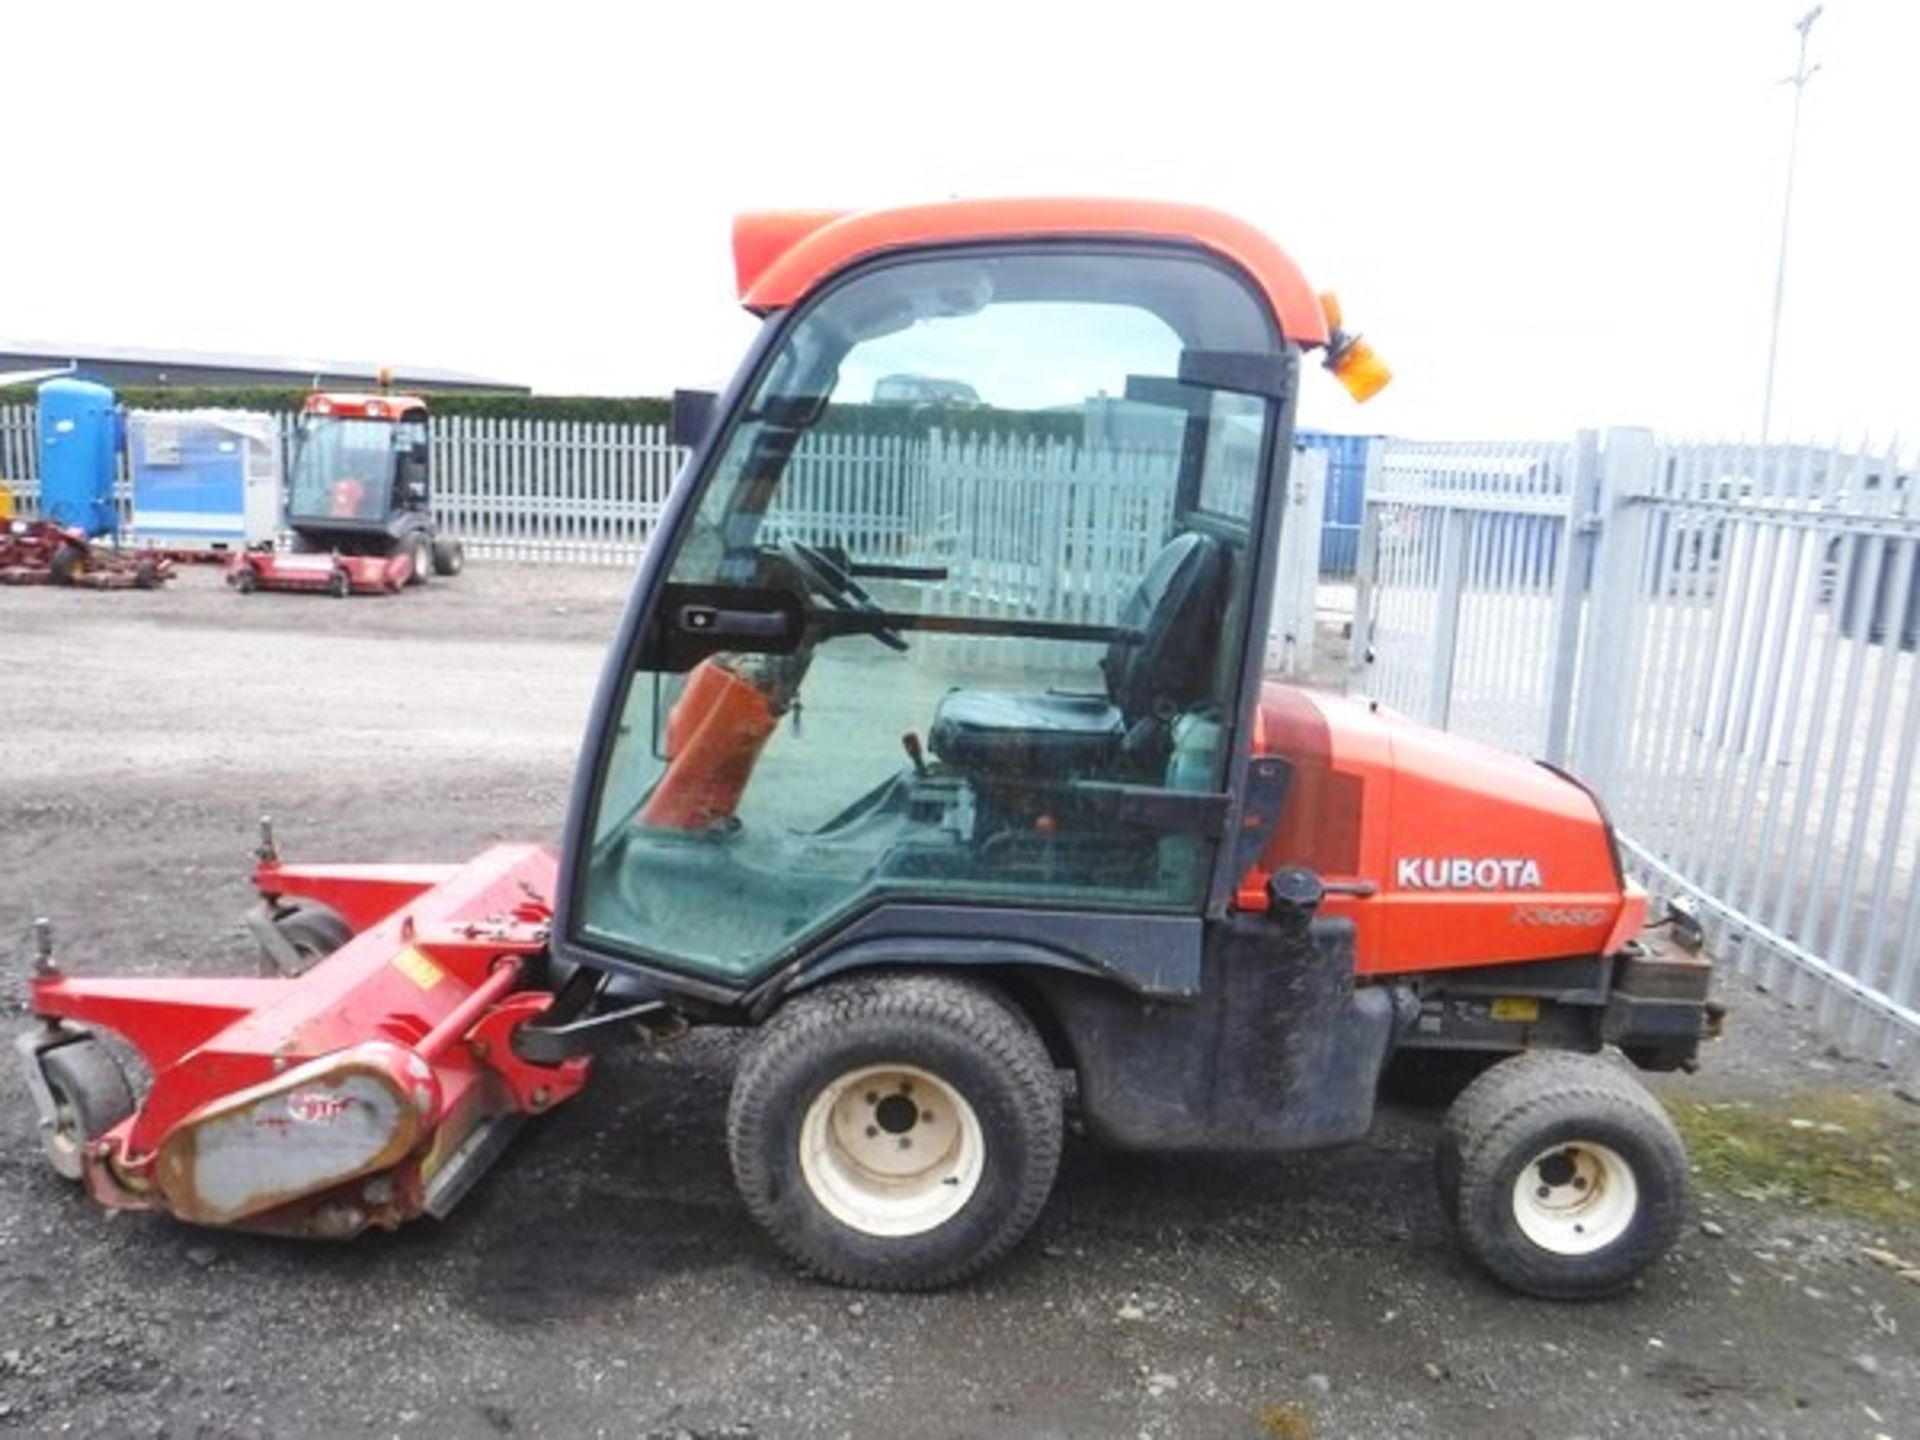 2012 KUBOTA 3680FC. Reg No SP12 AHL c/w flaildeck 155 out front mower. 1545hrs (not verified). This - Image 10 of 12